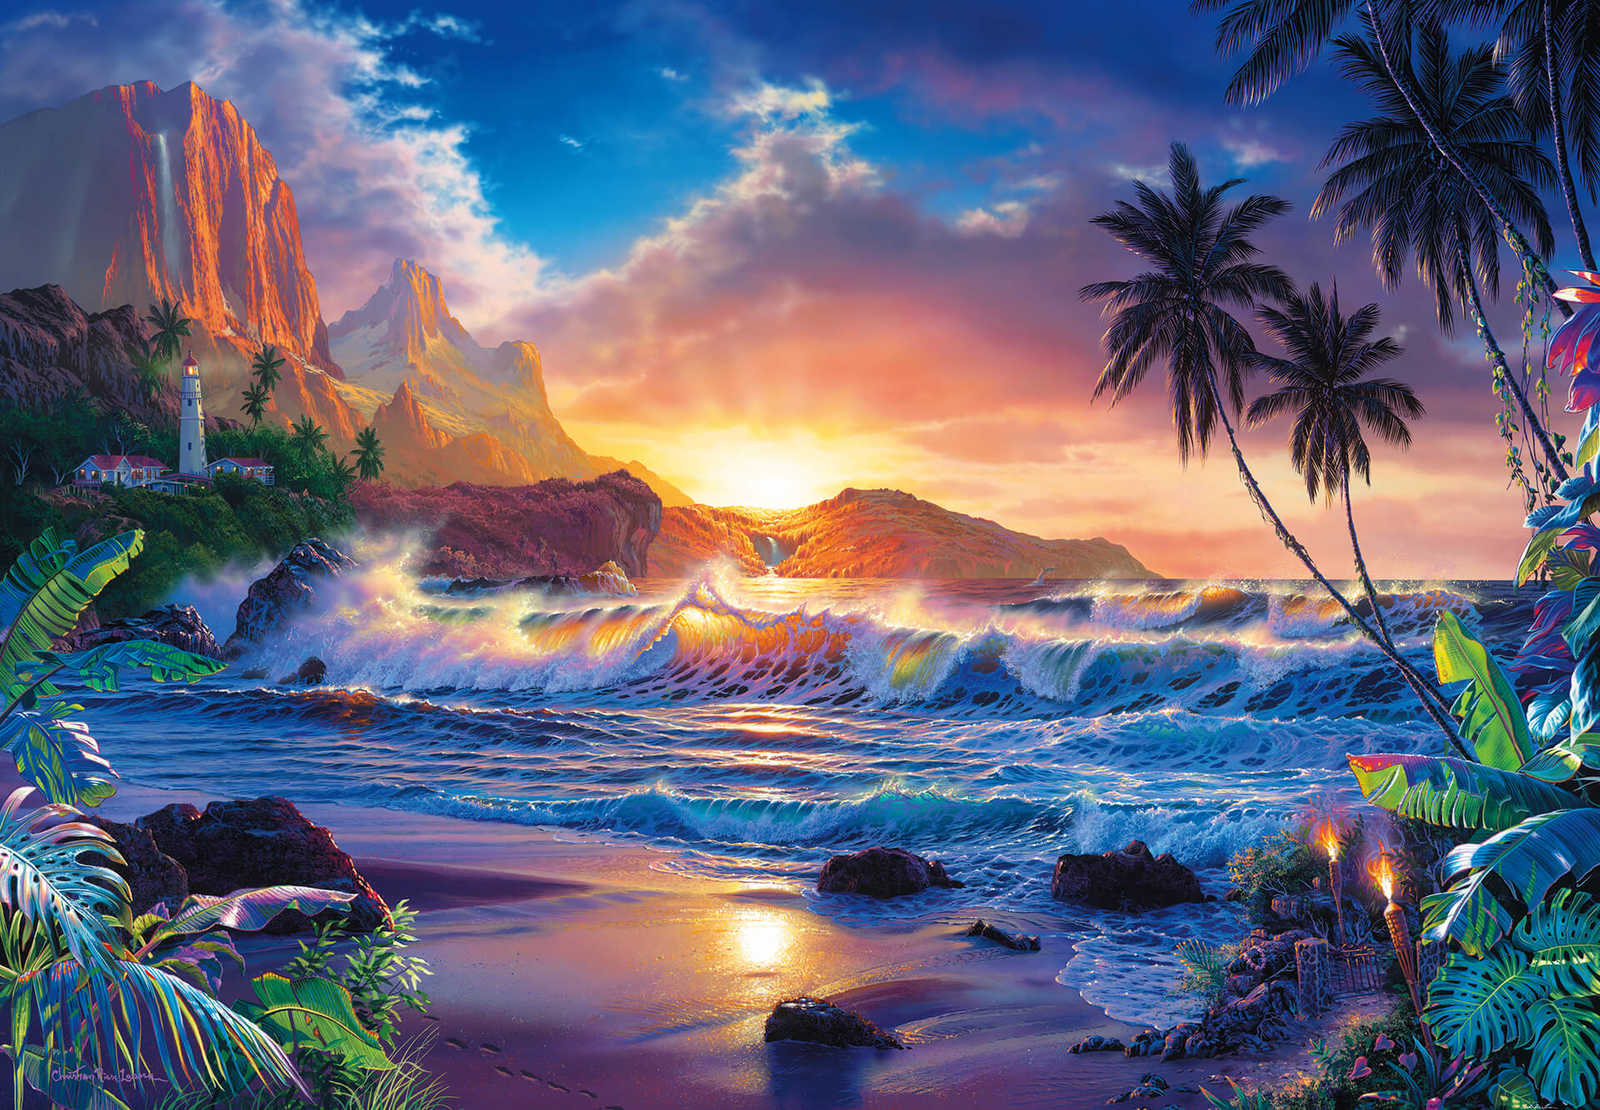         Paradise mural with tropical coastal landscape
    